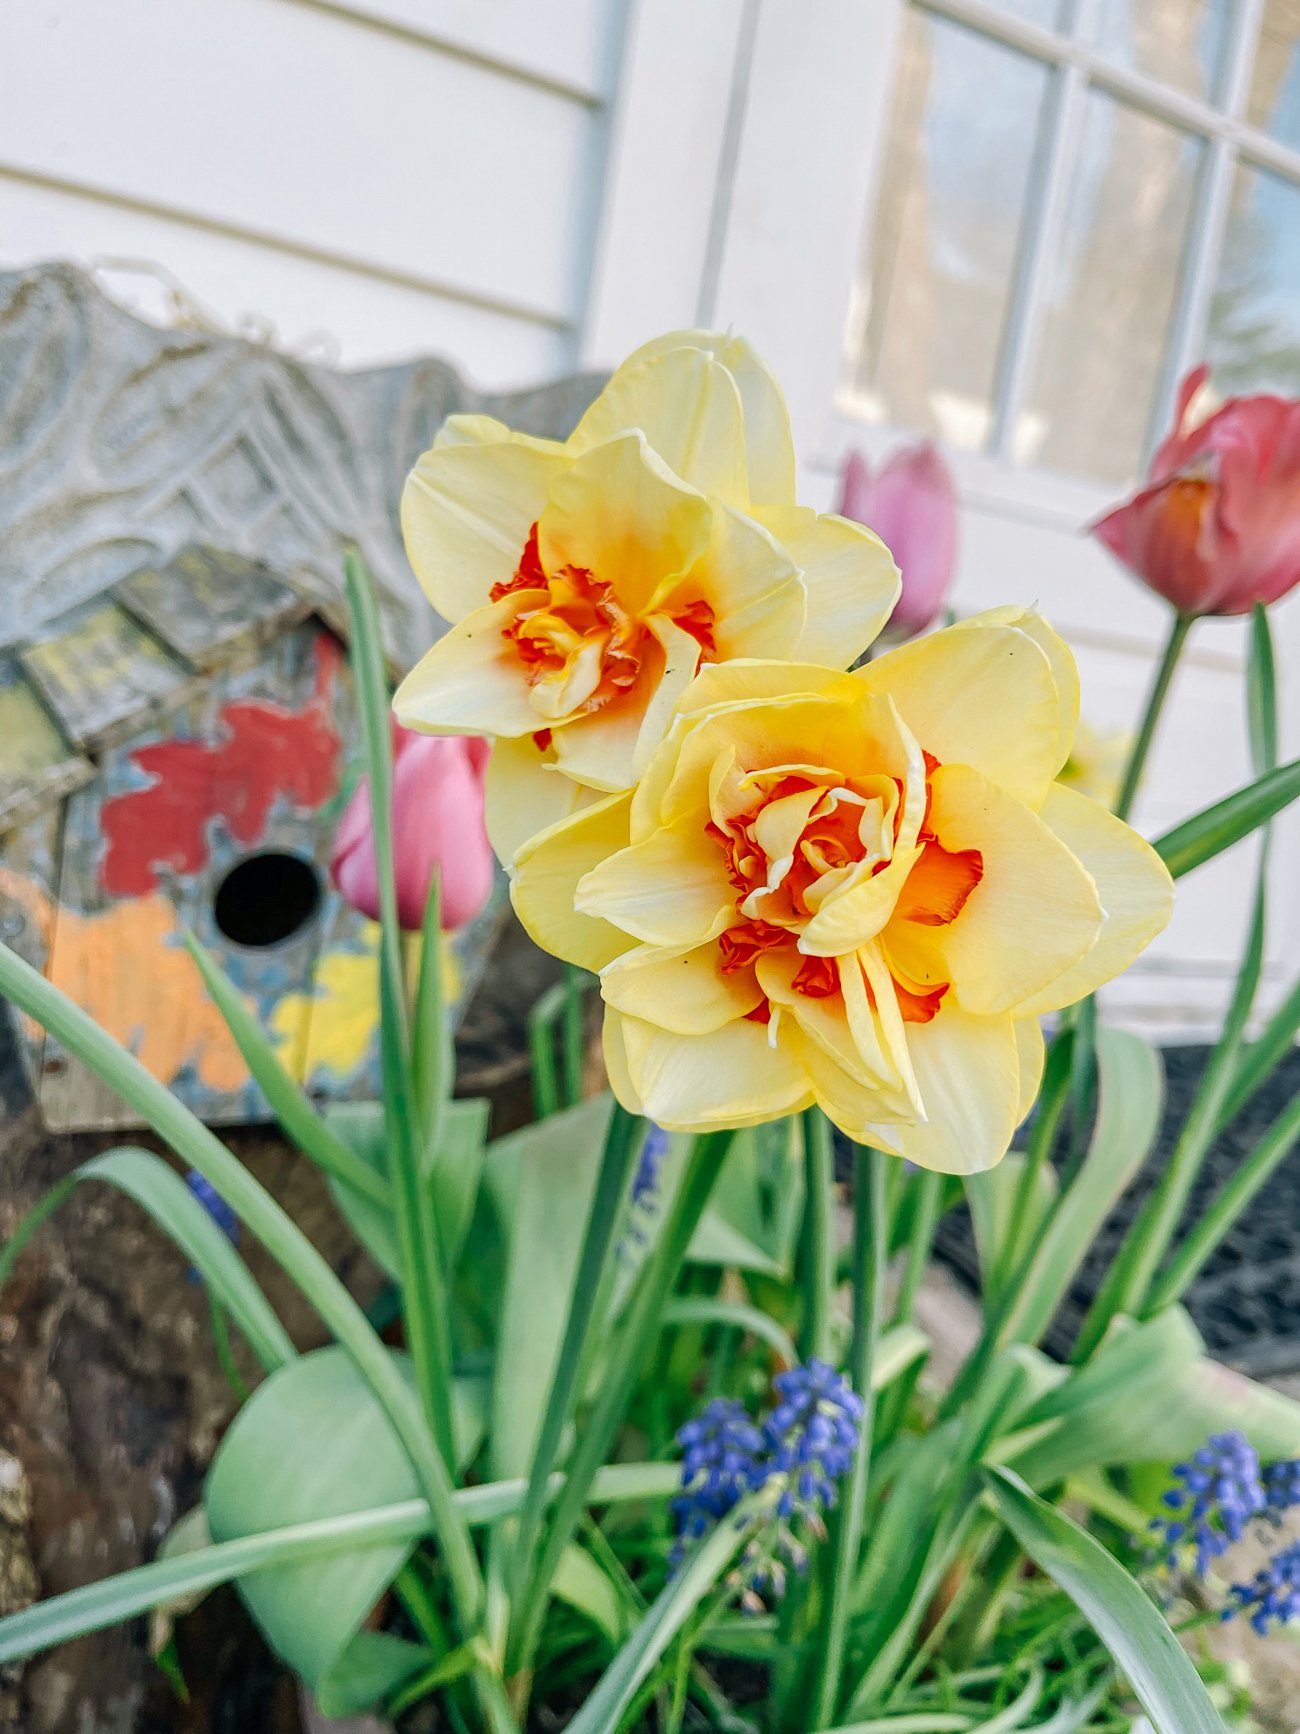 Pot with daffodils and other spring bulbs